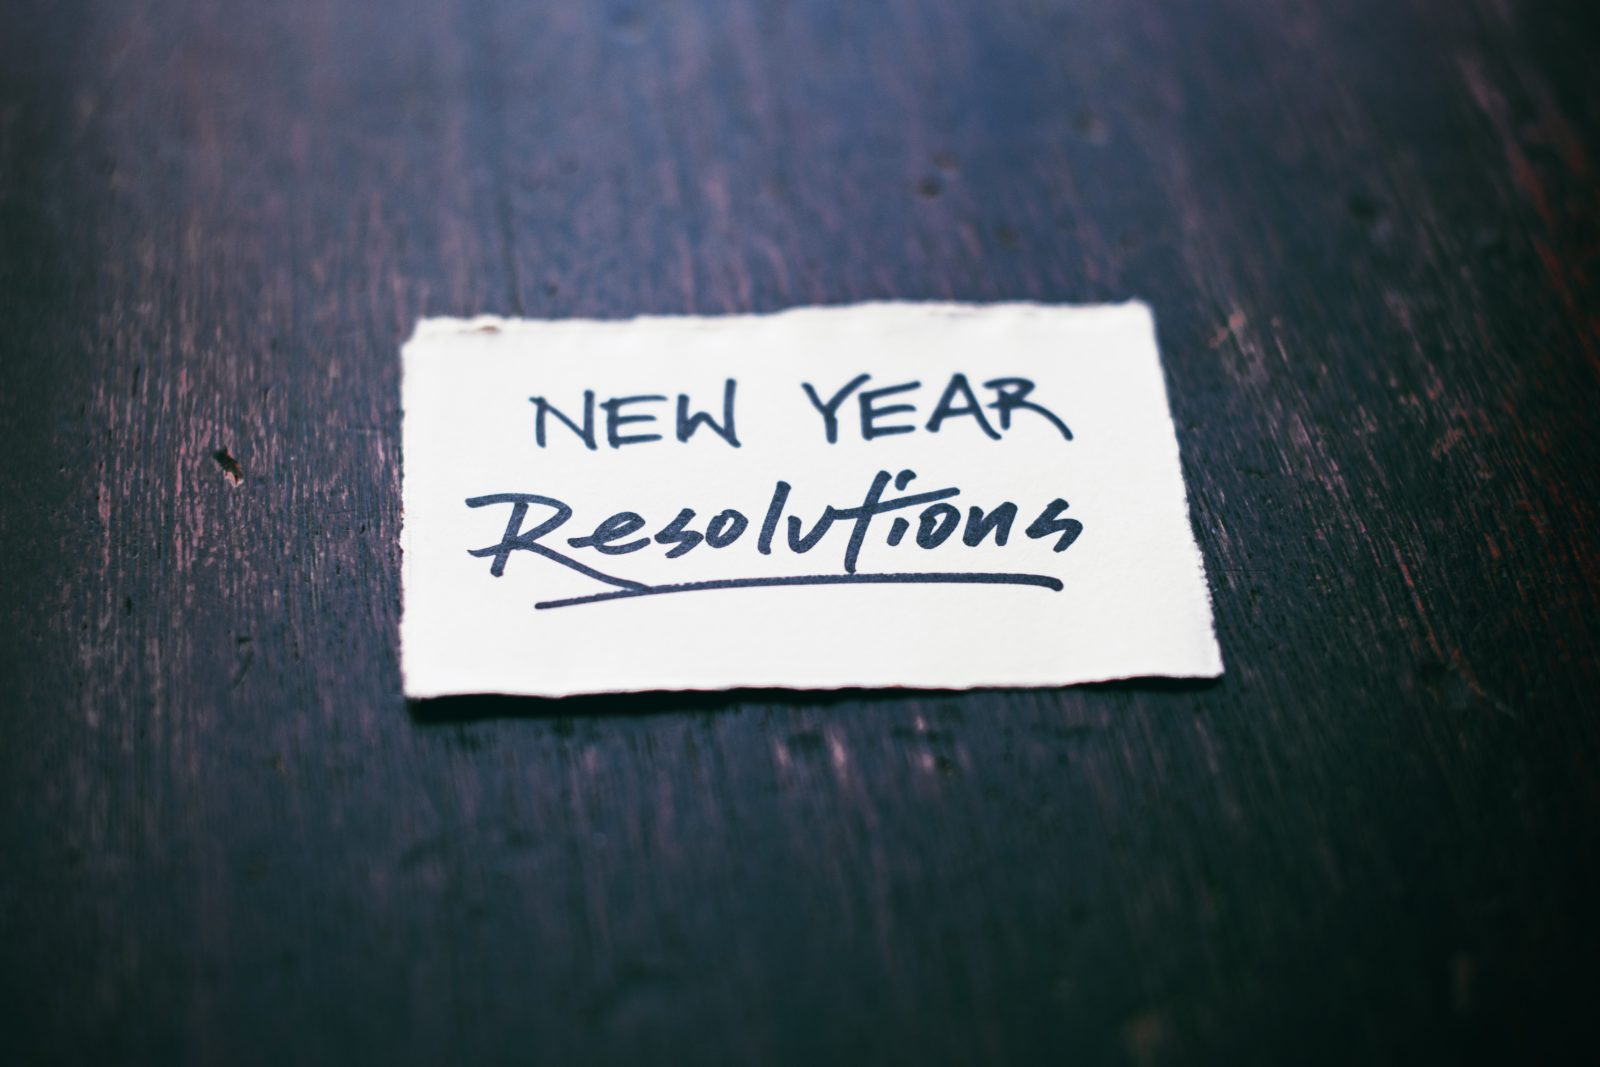 A square slip of paper rests on a dark wooden table. The words "New Year Resolutions" are written on the paper in heavy black ink.